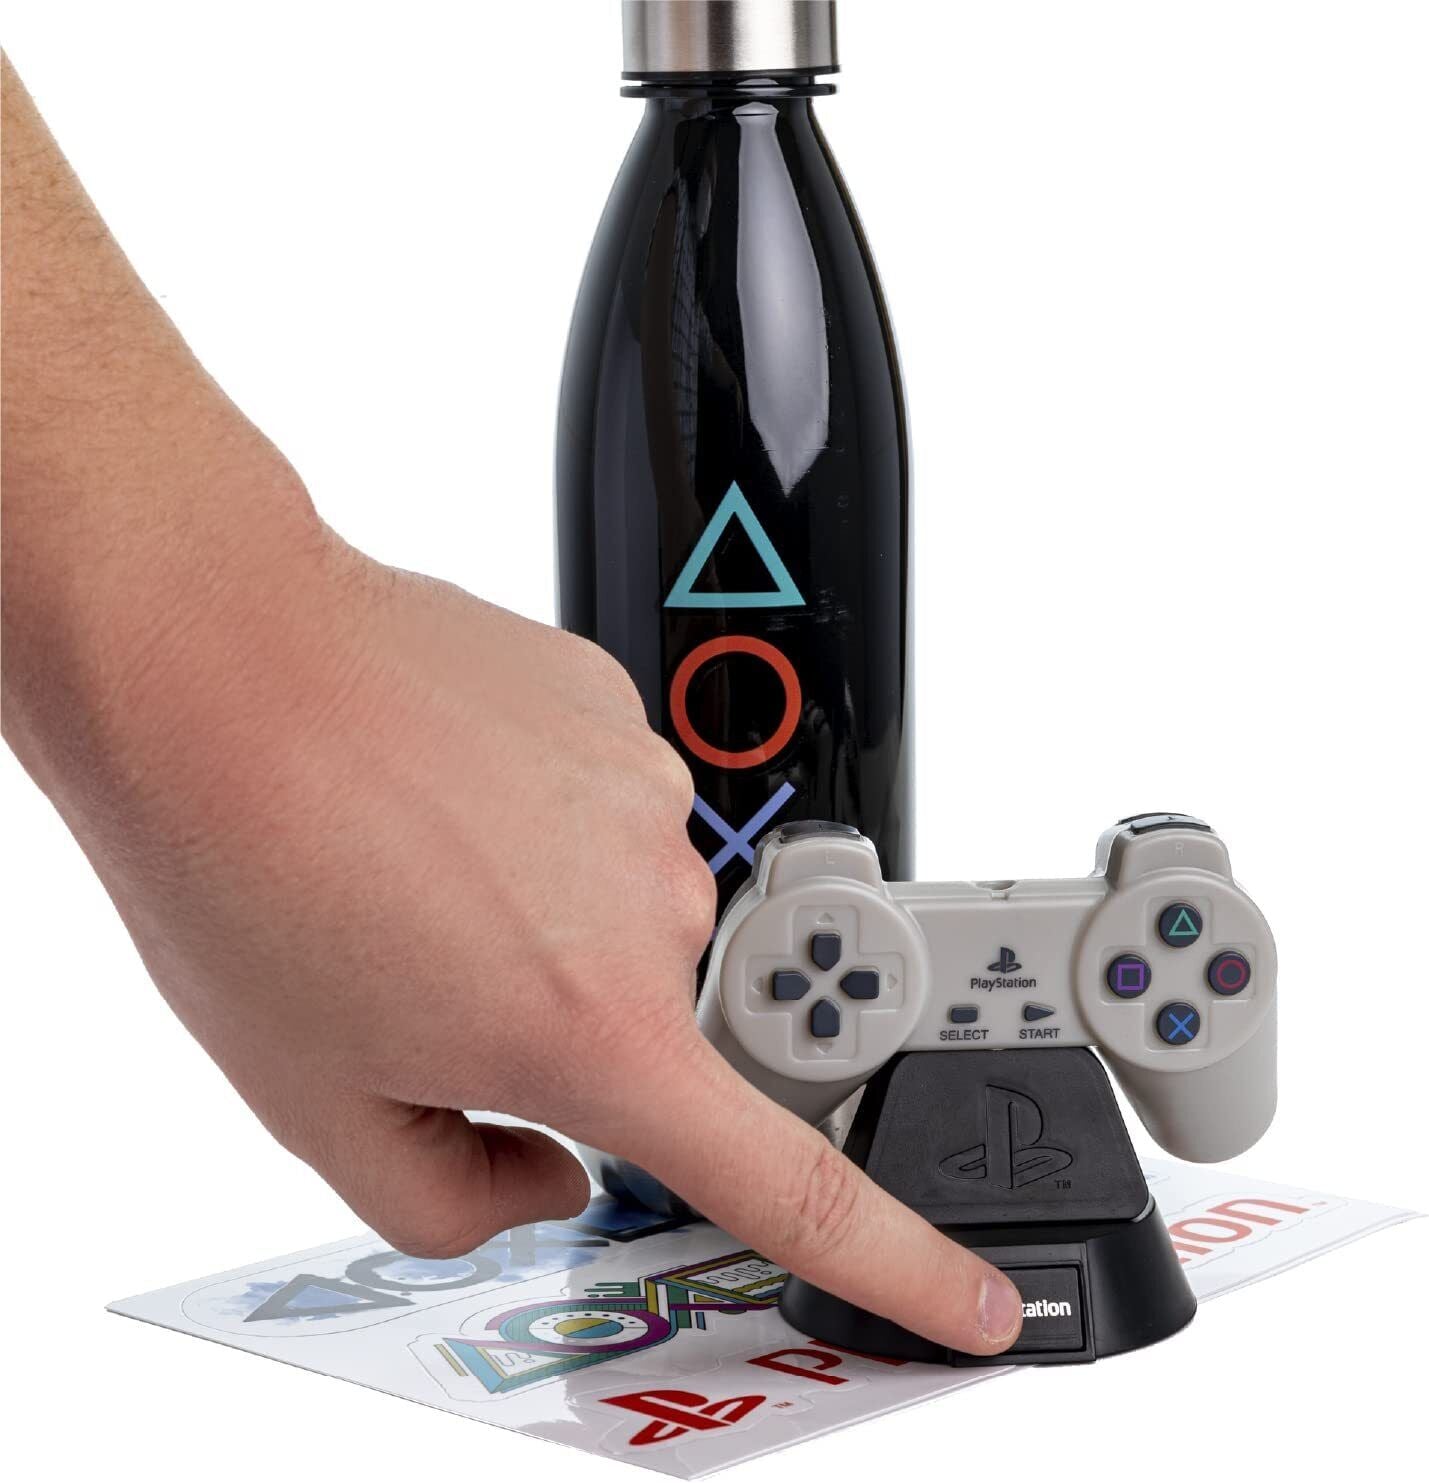 Playstation Gift Set with Icons Light, Stickers, and 680ml Bottle - Toptoys2u